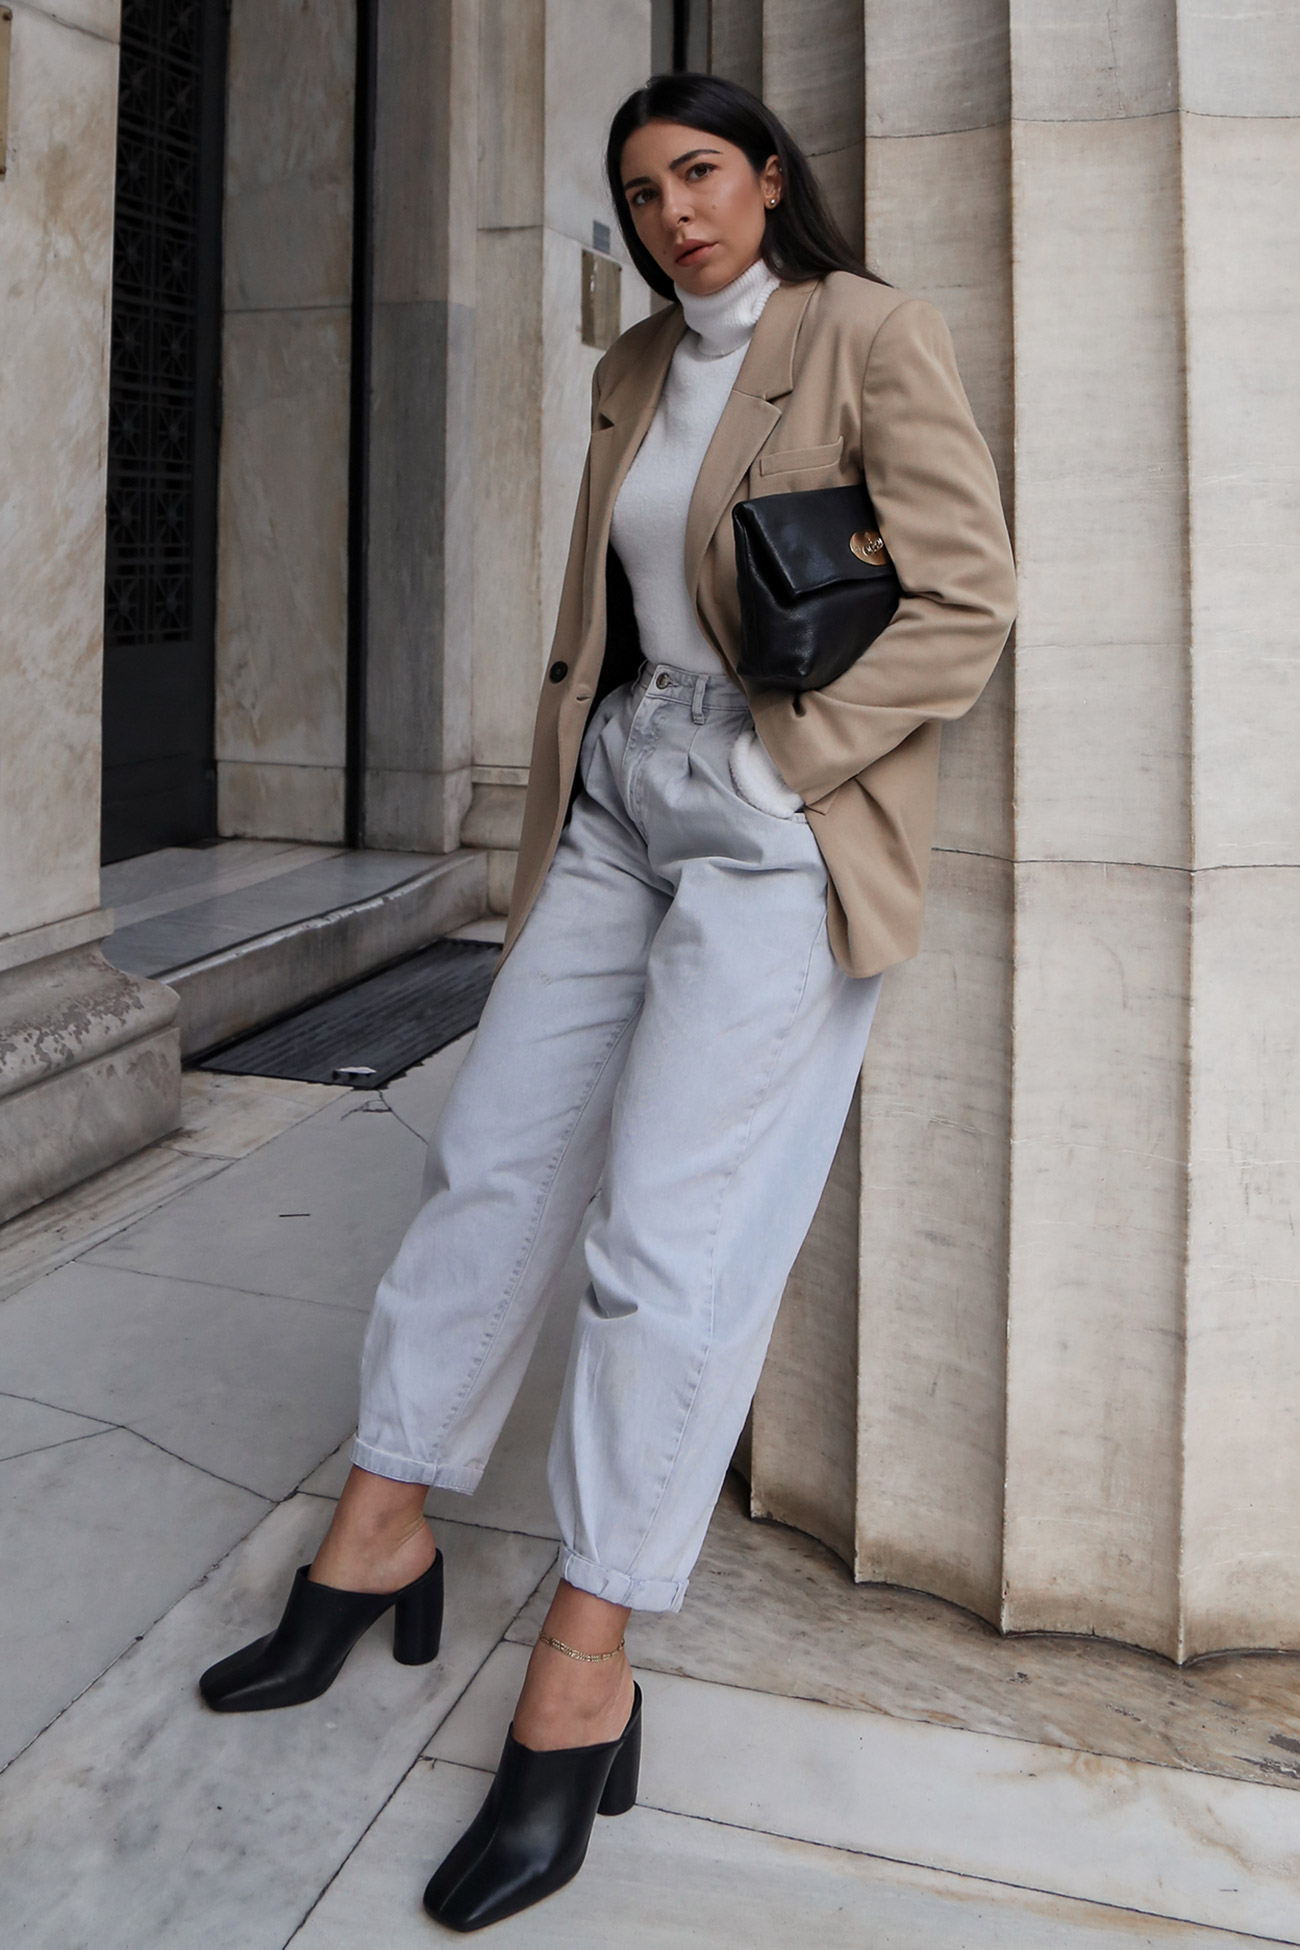 How To Wear A Women's Suit Casually & 10 Outfit Ideas - Stella ASteria